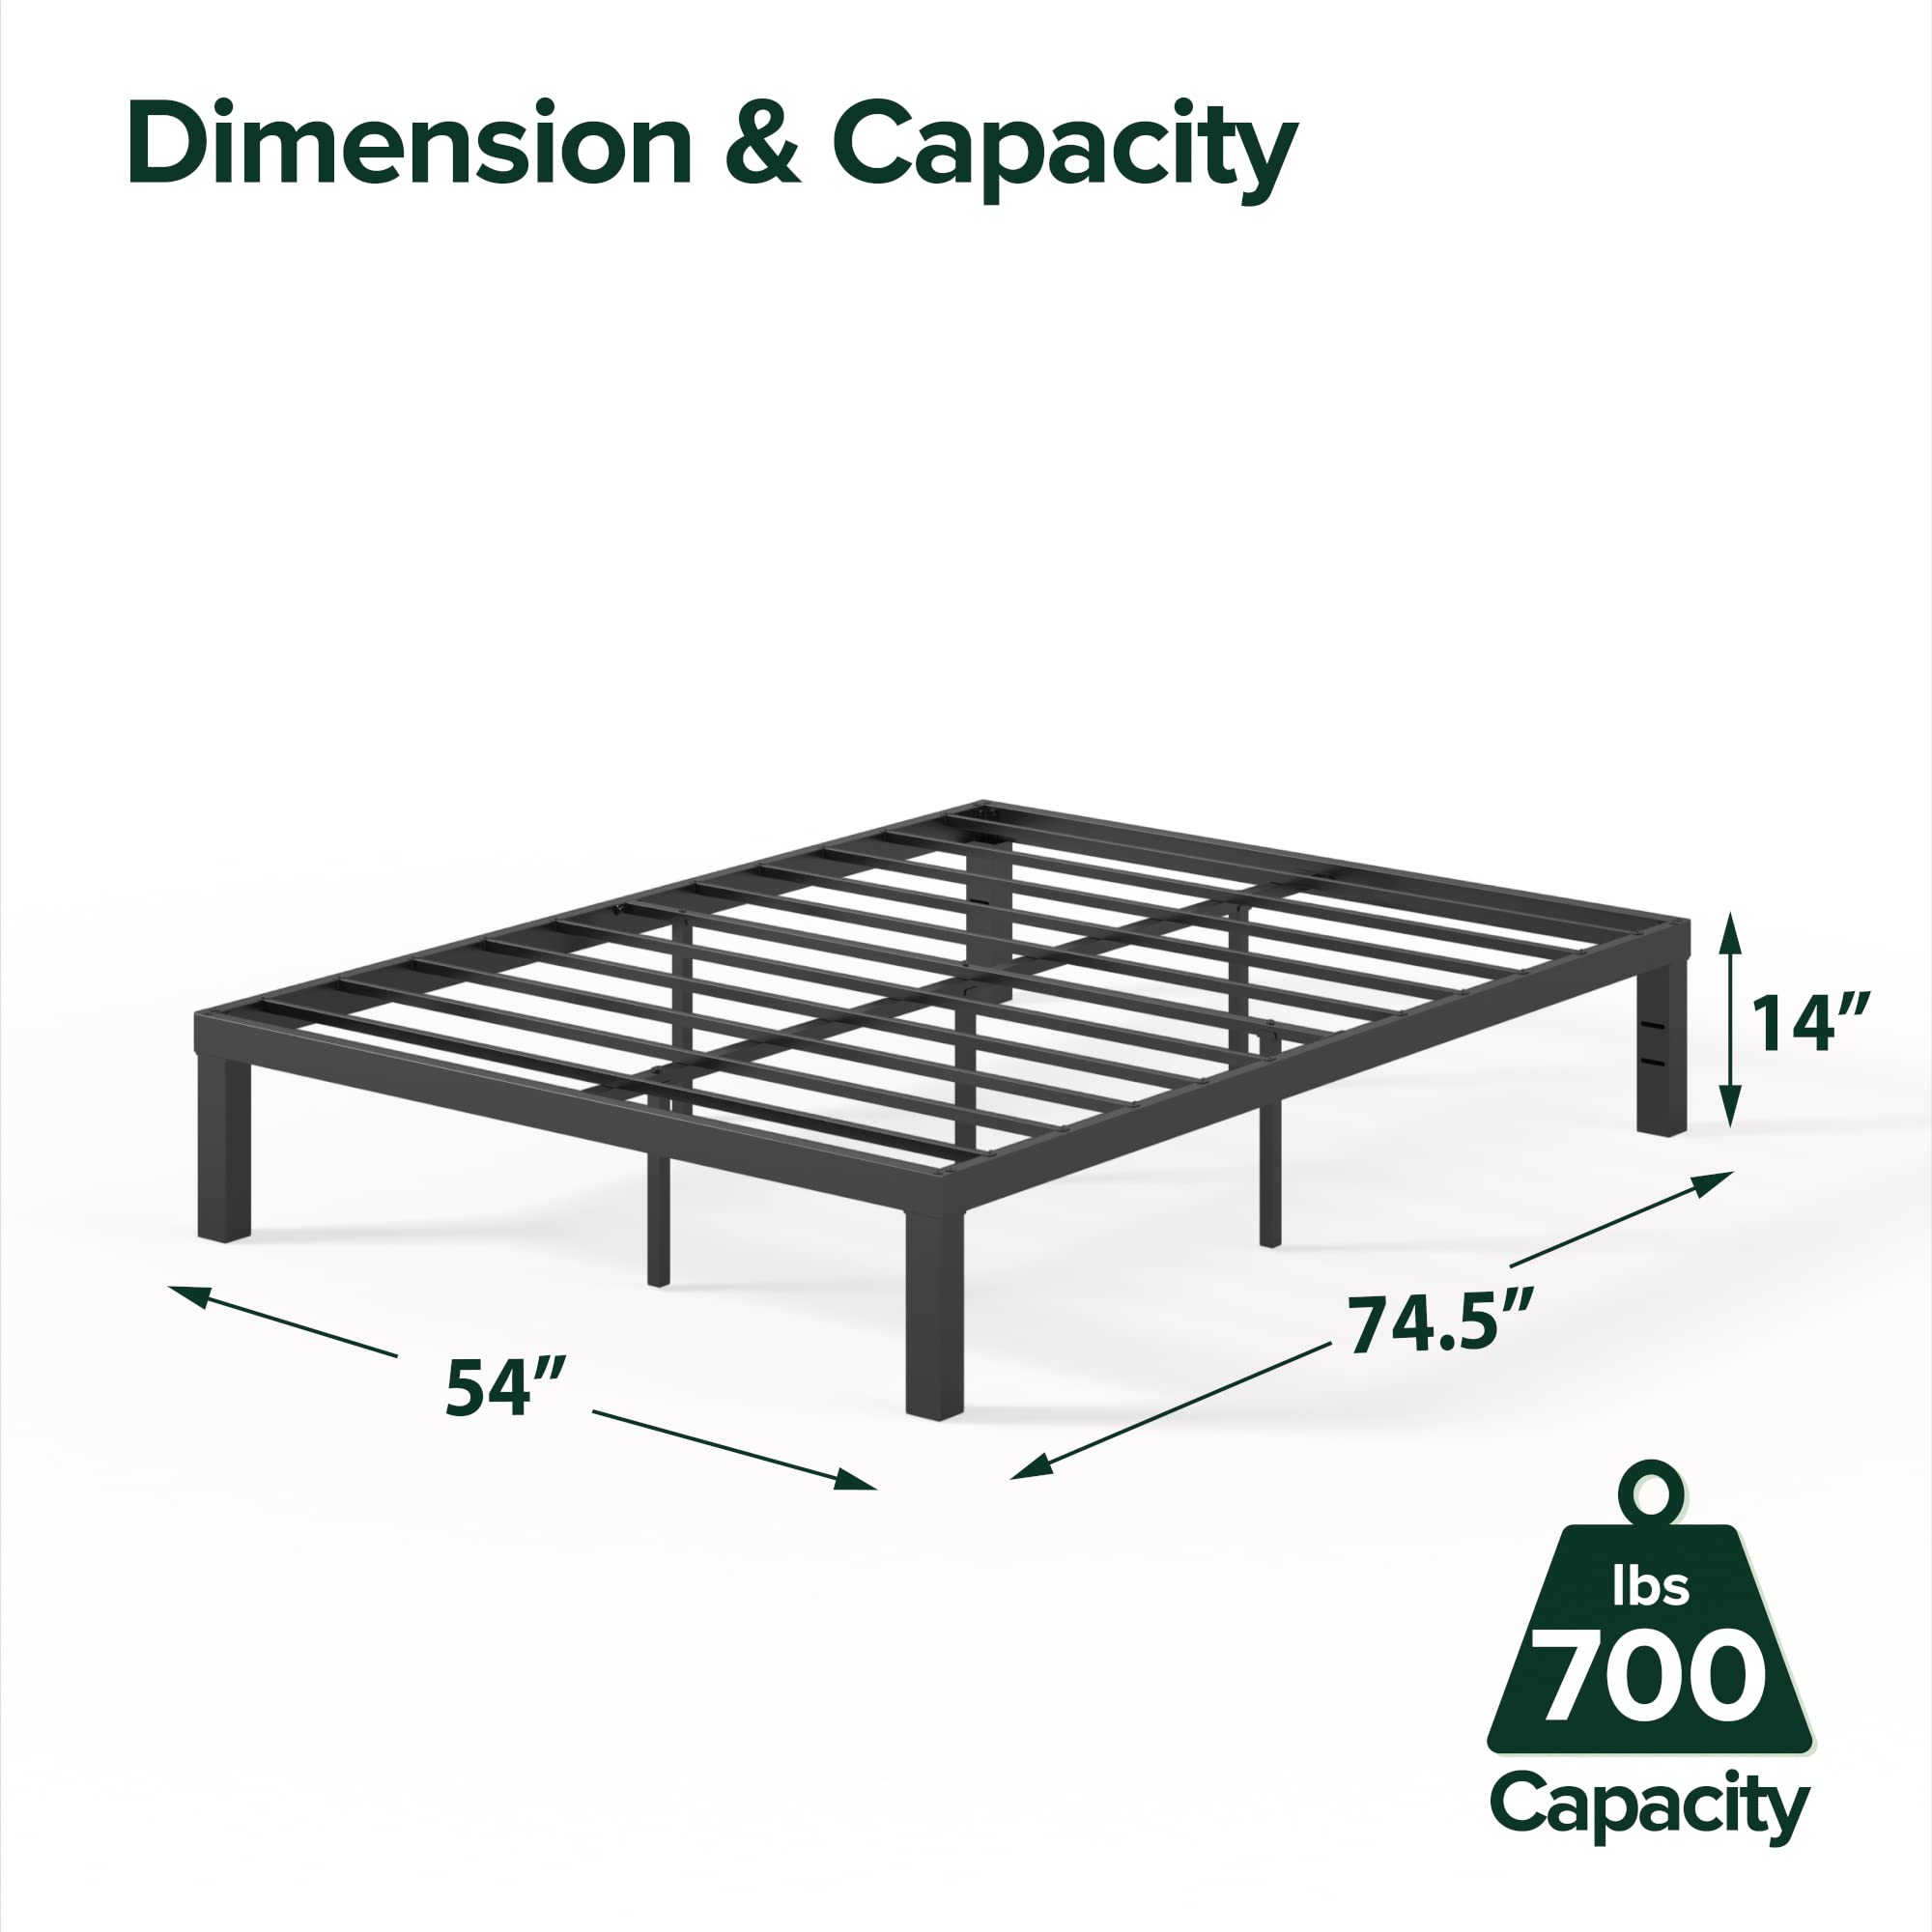 ZINUS Luis 14 Inch QuickLock Metal Platform Bed Frame / Mattress Foundation with Steel Slat Support / No Box Spring Needed / Easy Assembly, Full